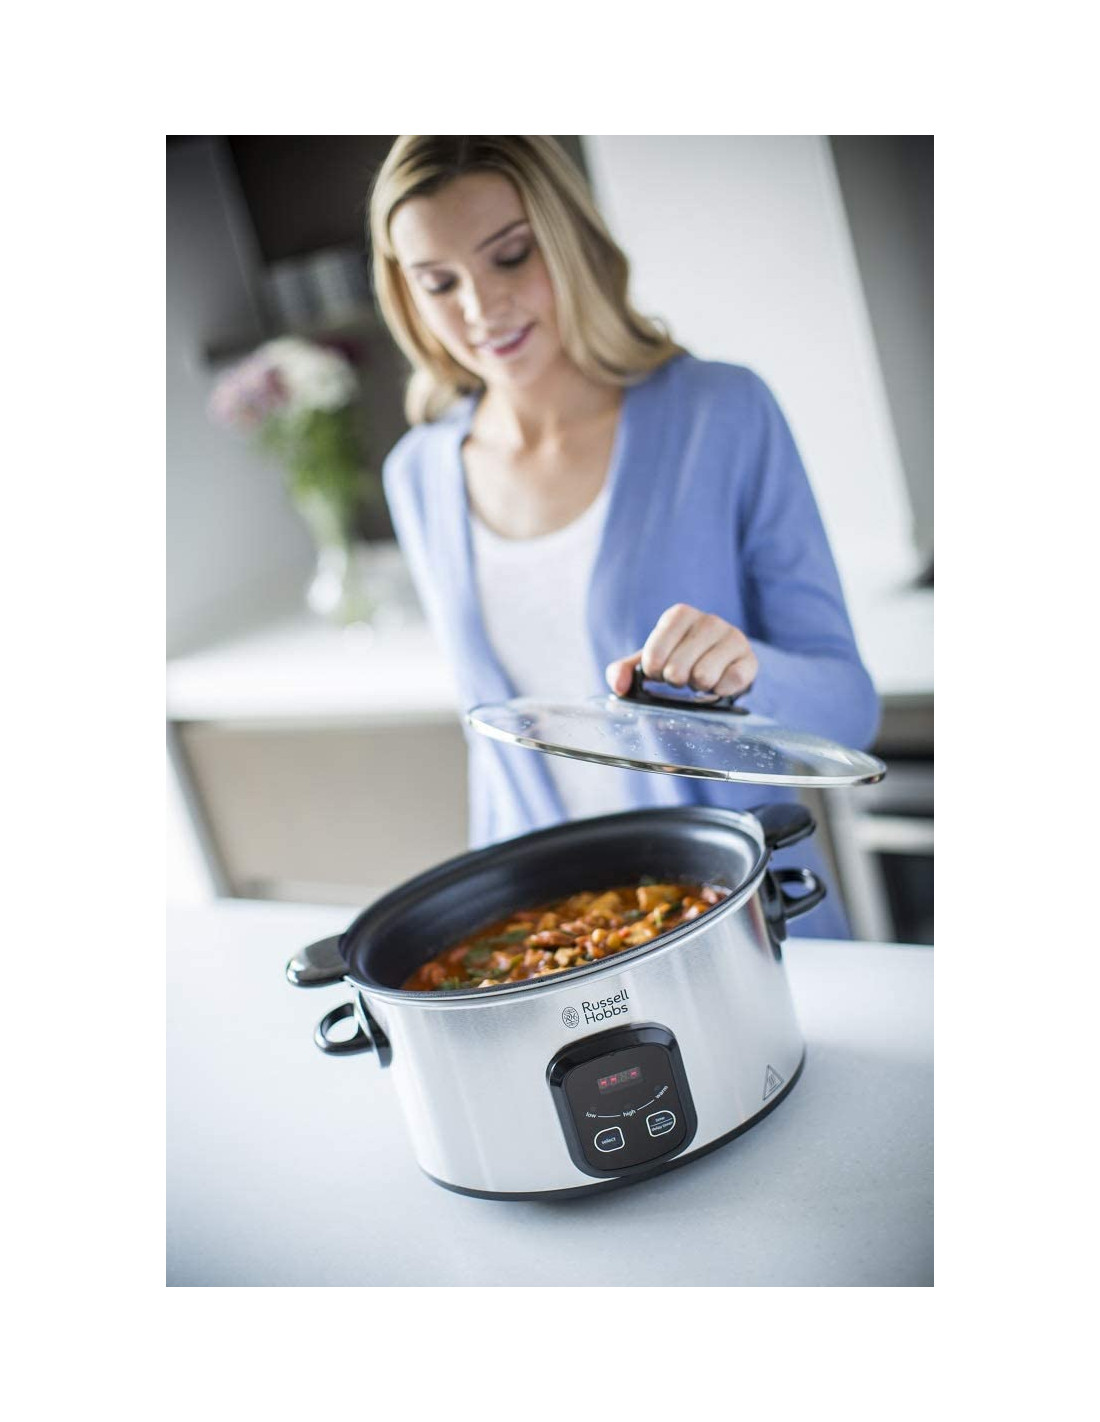 https://catherinealoi.pf/6715-thickbox_default/russell-hobbs-22750-56-mijoteuse-electrique-.jpg